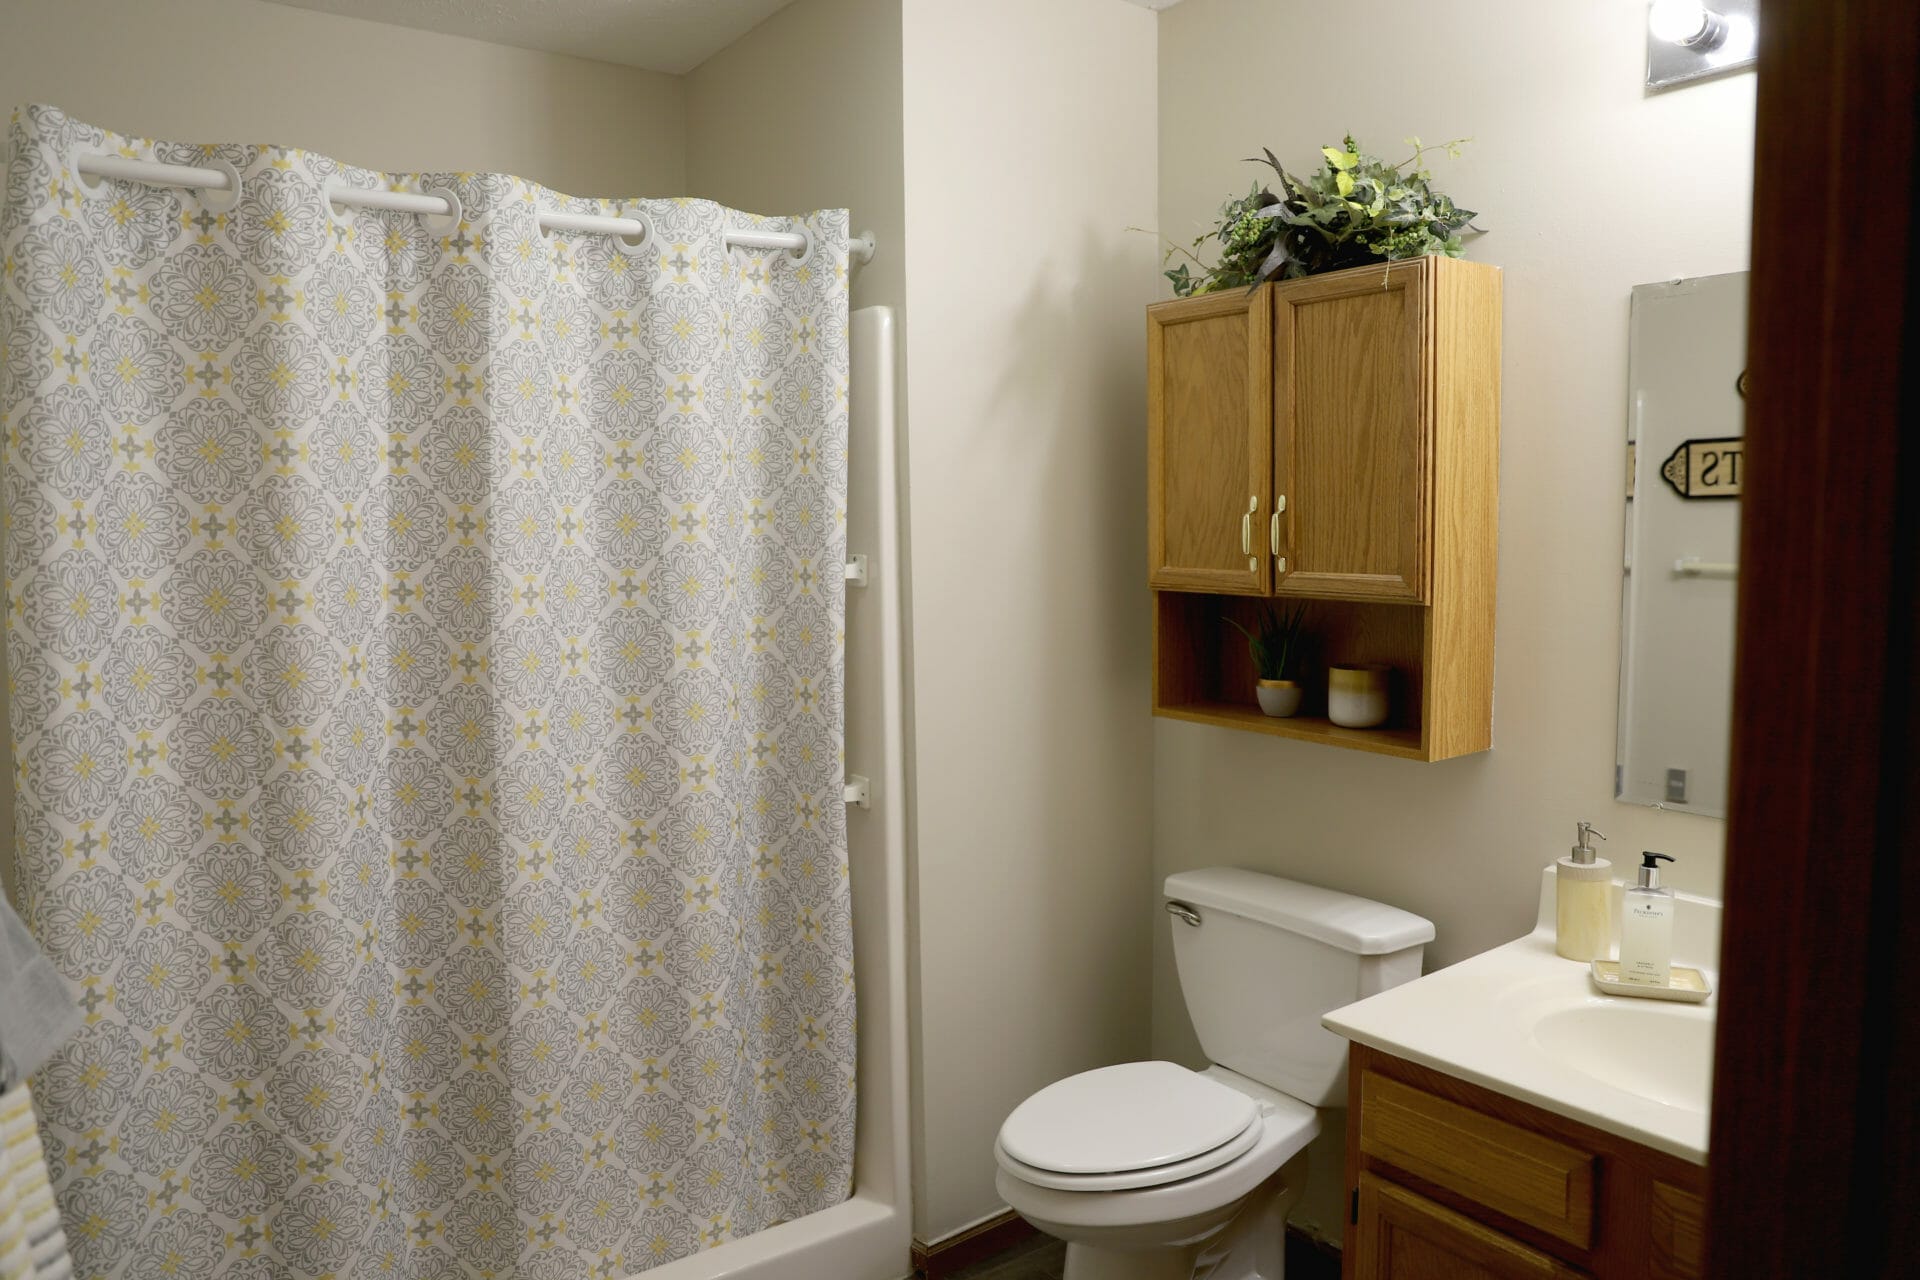 <span  class="uc_style_uc_tiles_grid_image_elementor_uc_items_attribute_title" style="color:#000000;">Interior of the bathroom at Rosegate Garden Homes </span>